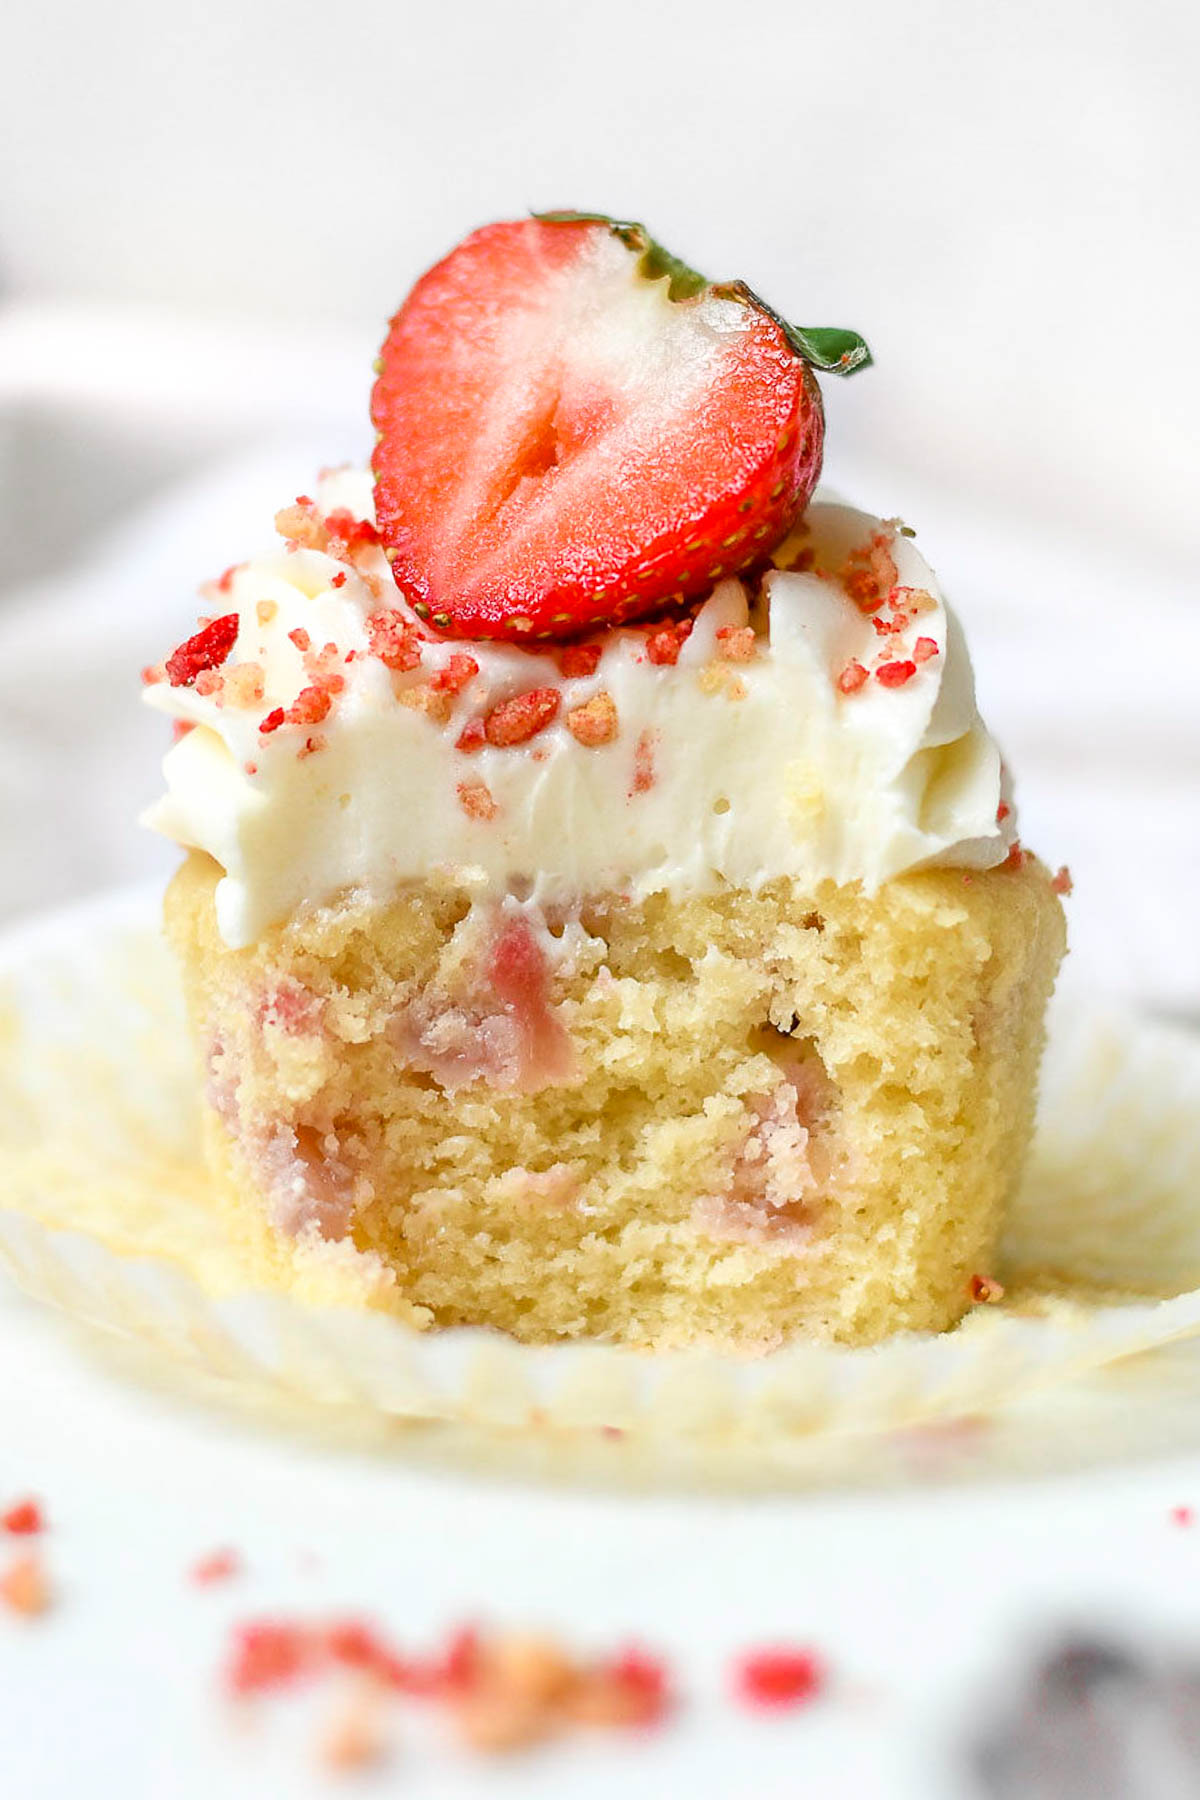 Inside of a strawberry crunch cupcake showing the fresh strawberries baked into the batter.